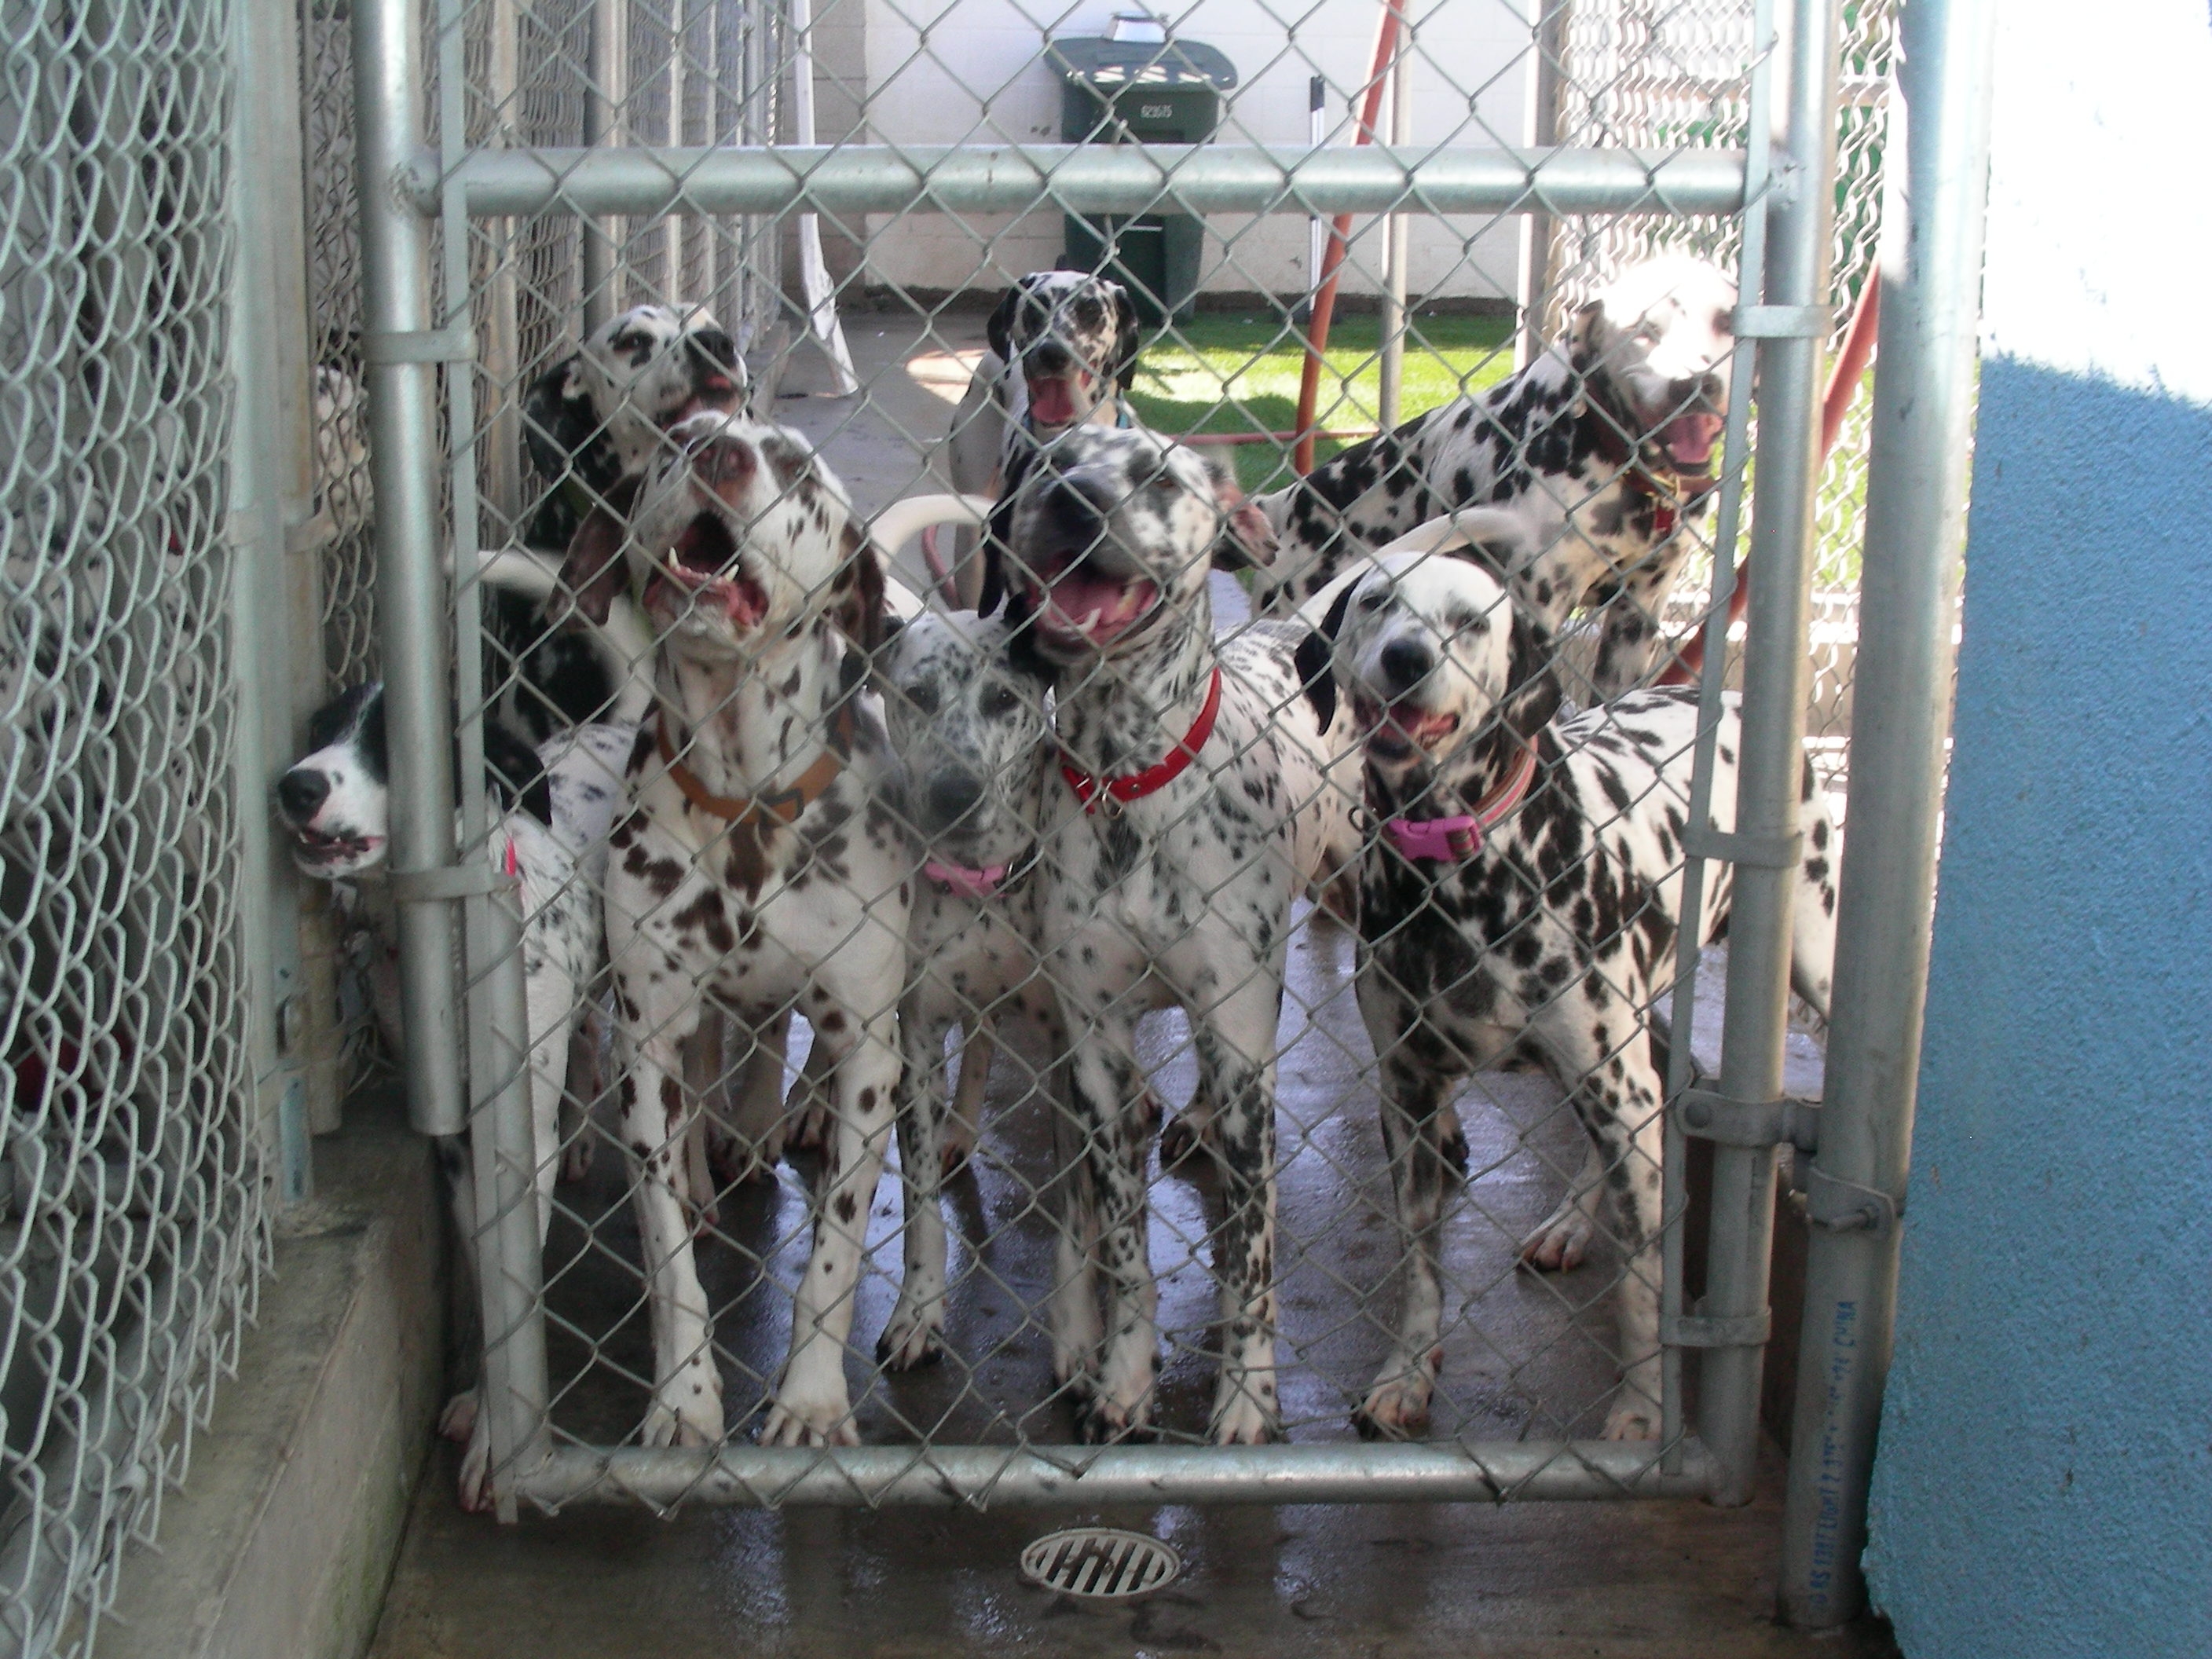 Dalmatian Puppies For Adoption Near Me Hot Sale, 20 OFF   www ...